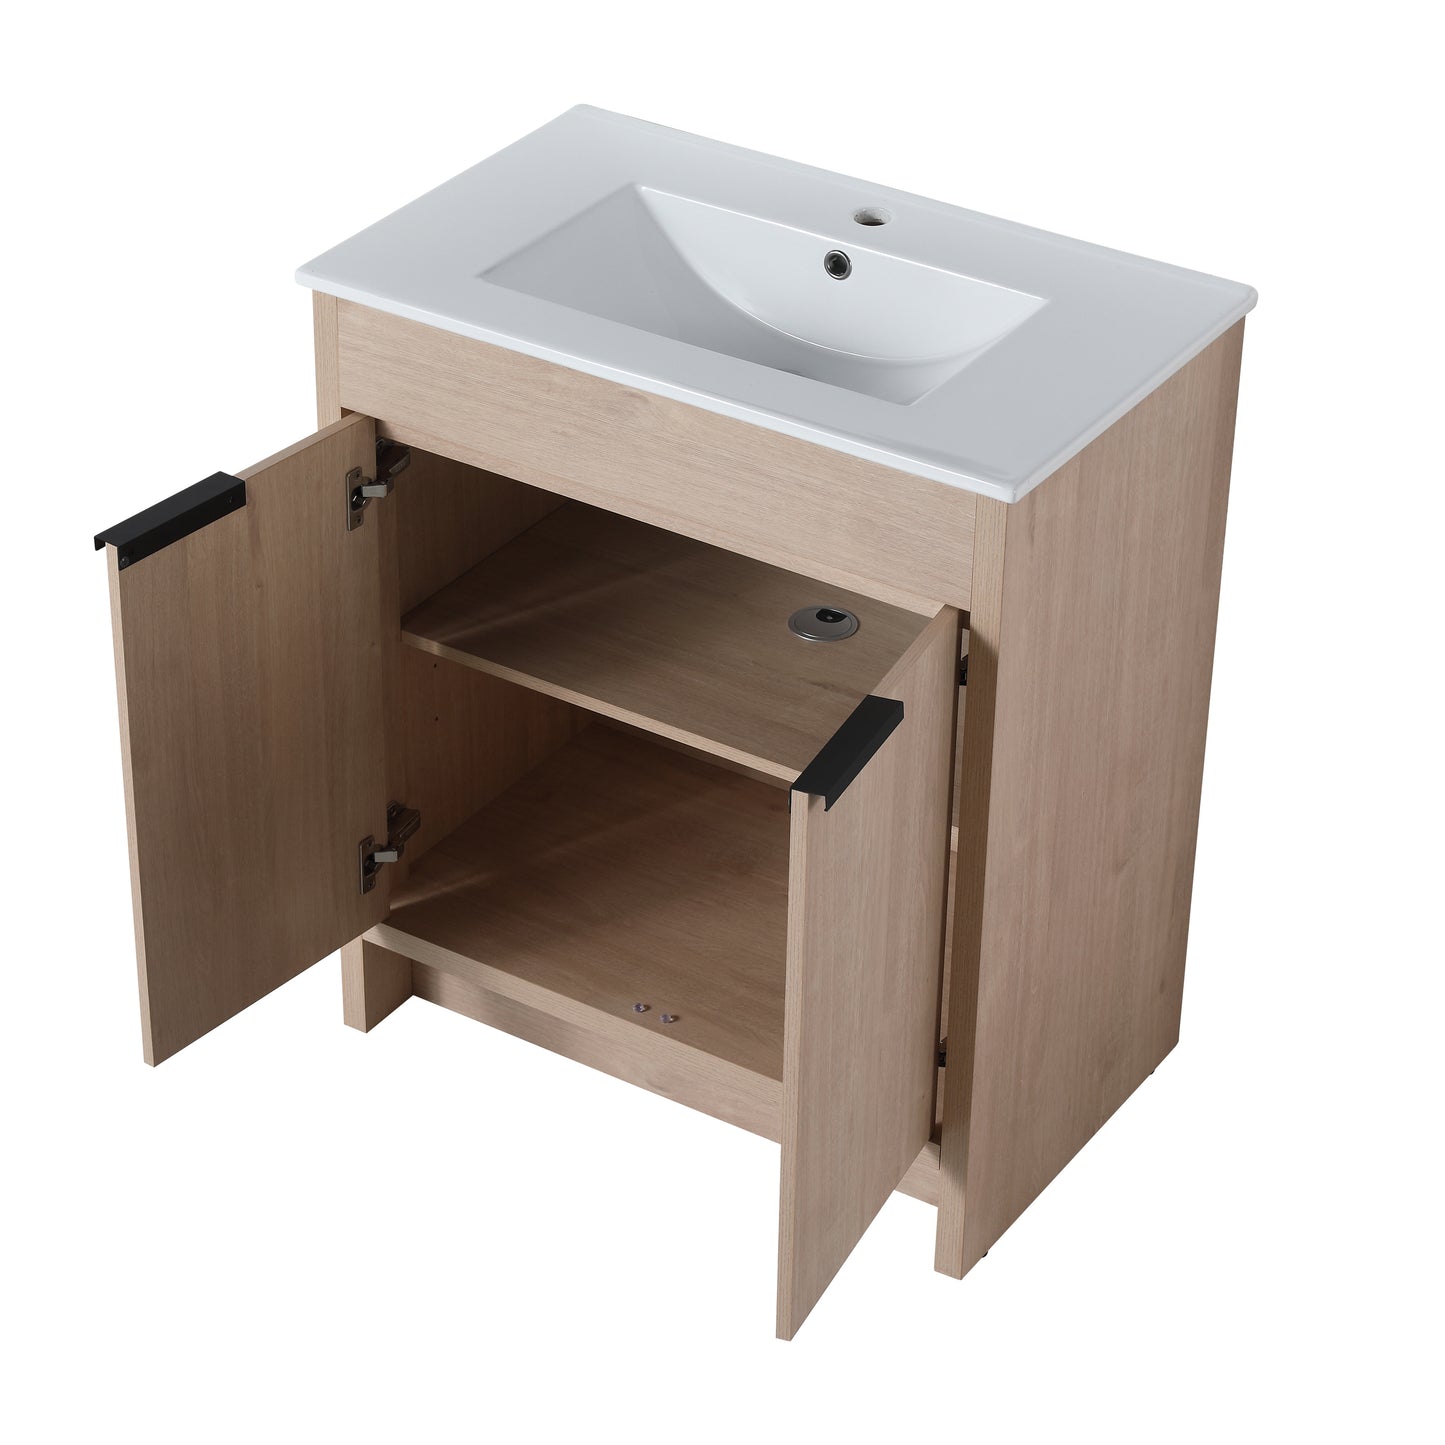 30 Inch Freestanding Bathroom Vanity with White Ceramic Sink & 2 Soft-Close Cabinet Doors (BVB02430PLO-BL9075B)=W999S00063